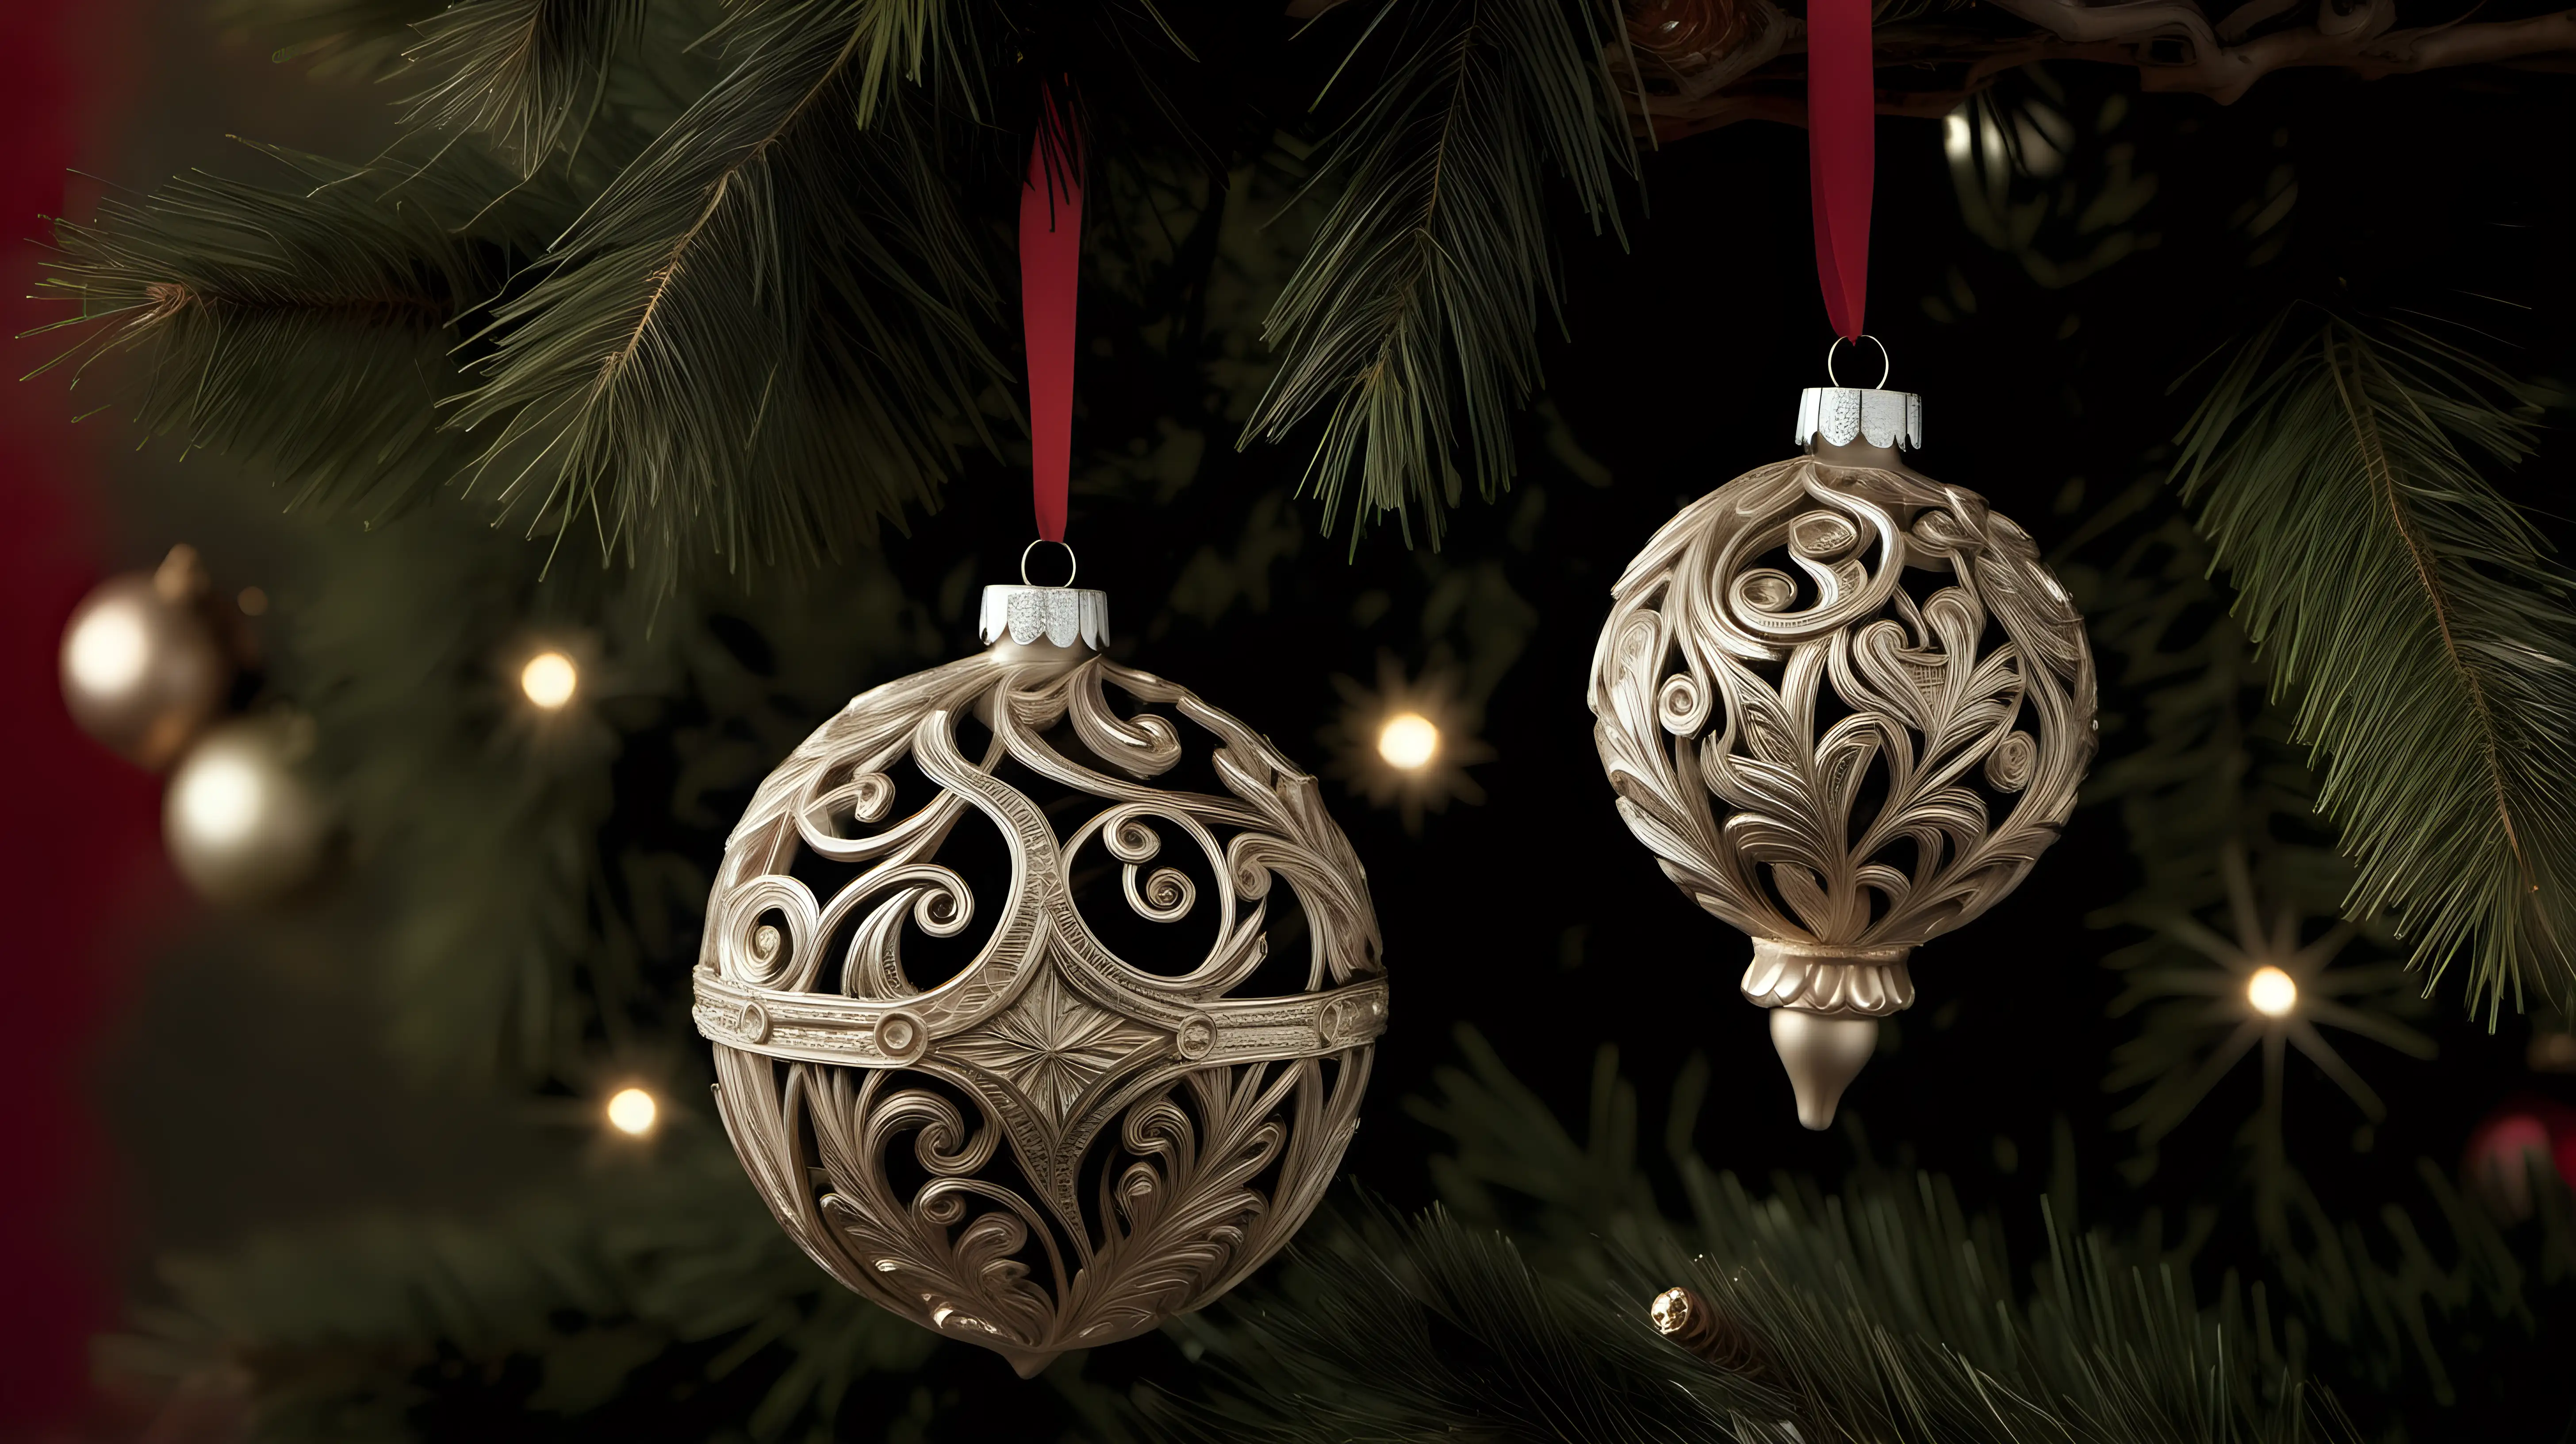 "Zoom in on the intricate designs of handcrafted ornaments hanging from the branches of a Christmas tree, each one a cherished memory."